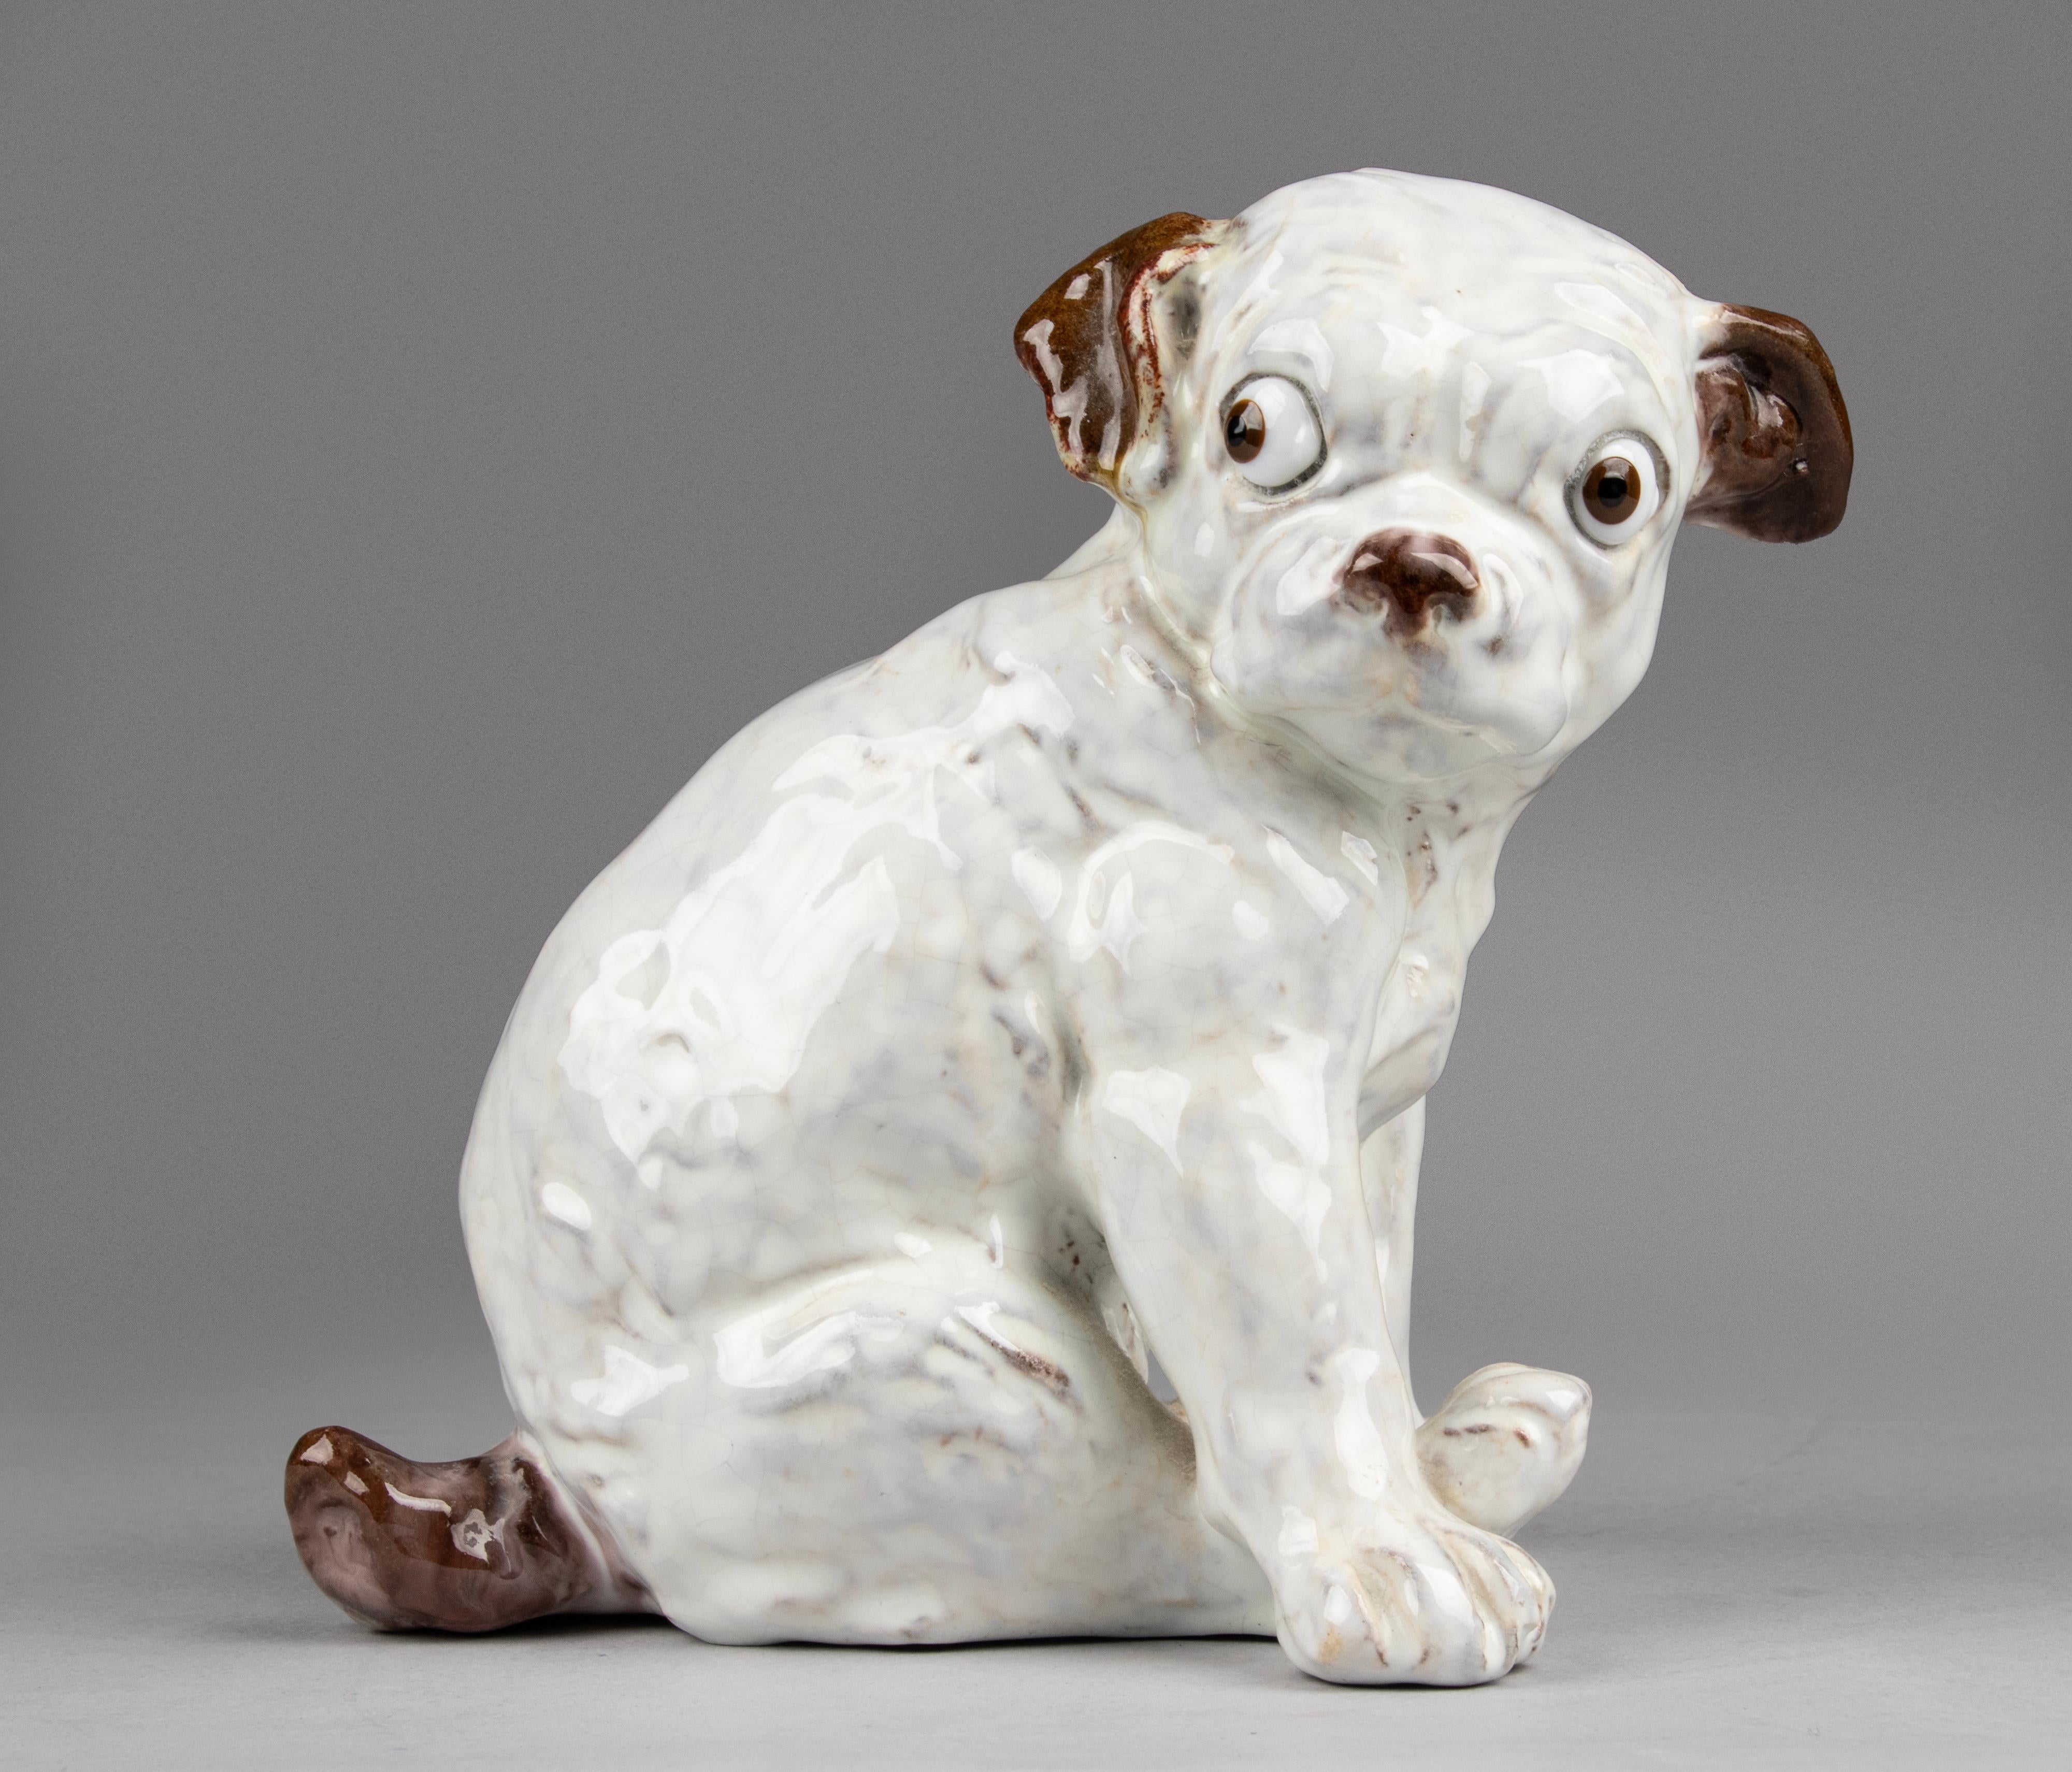 Beautiful ceramic sculpture of a puppy dog. The sculpture is made of clay / terra cotta and has a beautiful thick layer of glaze. The appearance has striking resemblances to a real puppy. The anatomy, but also the face expression. The eyes are made